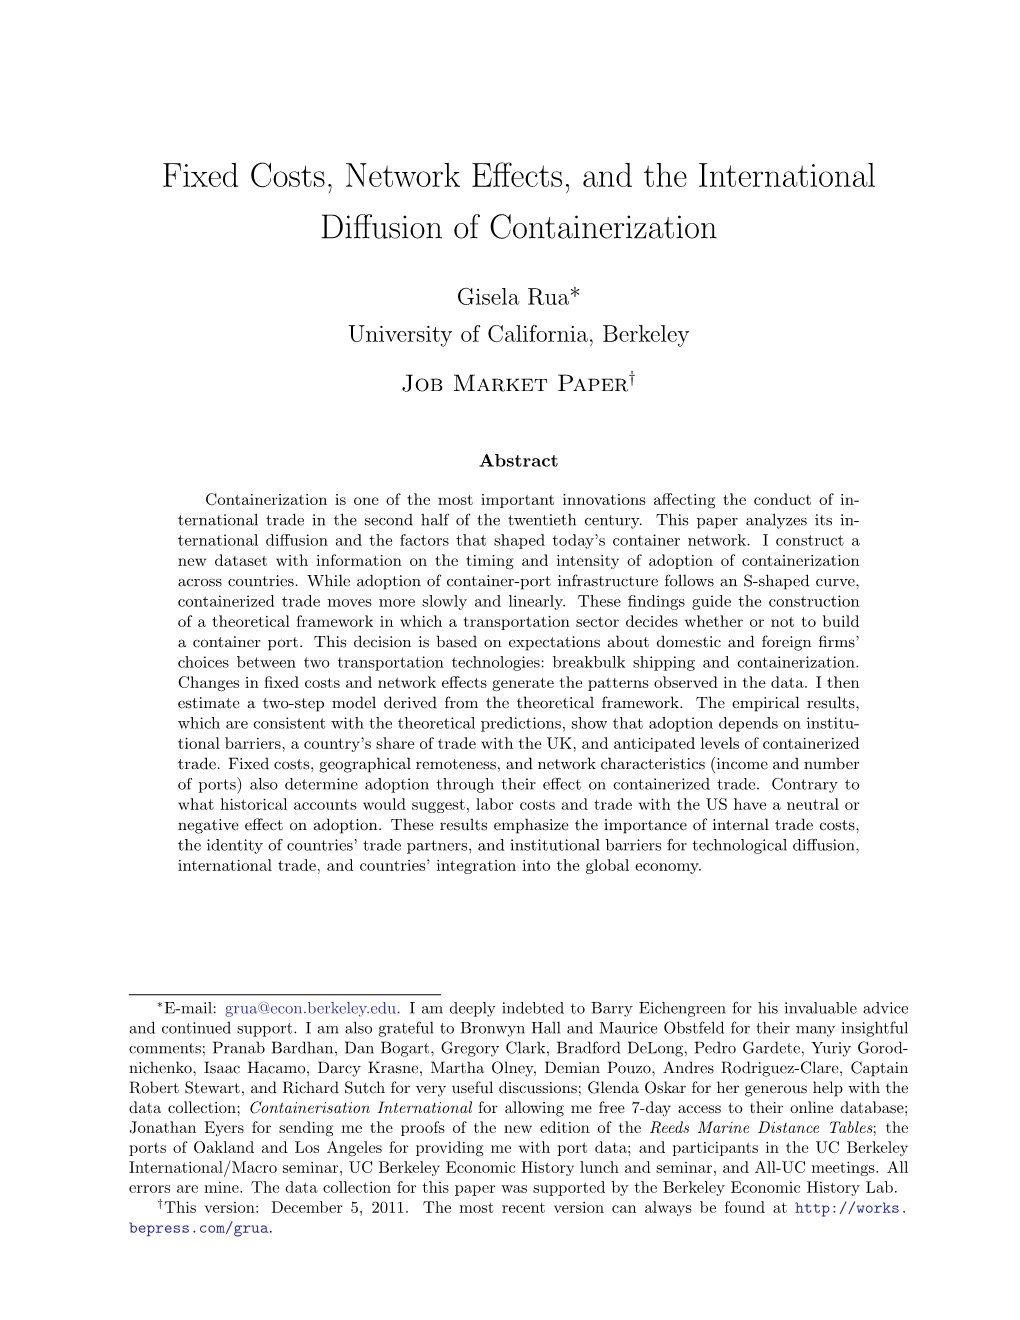 Fixed Costs, Network Effects, and the International Diffusion of Containerization